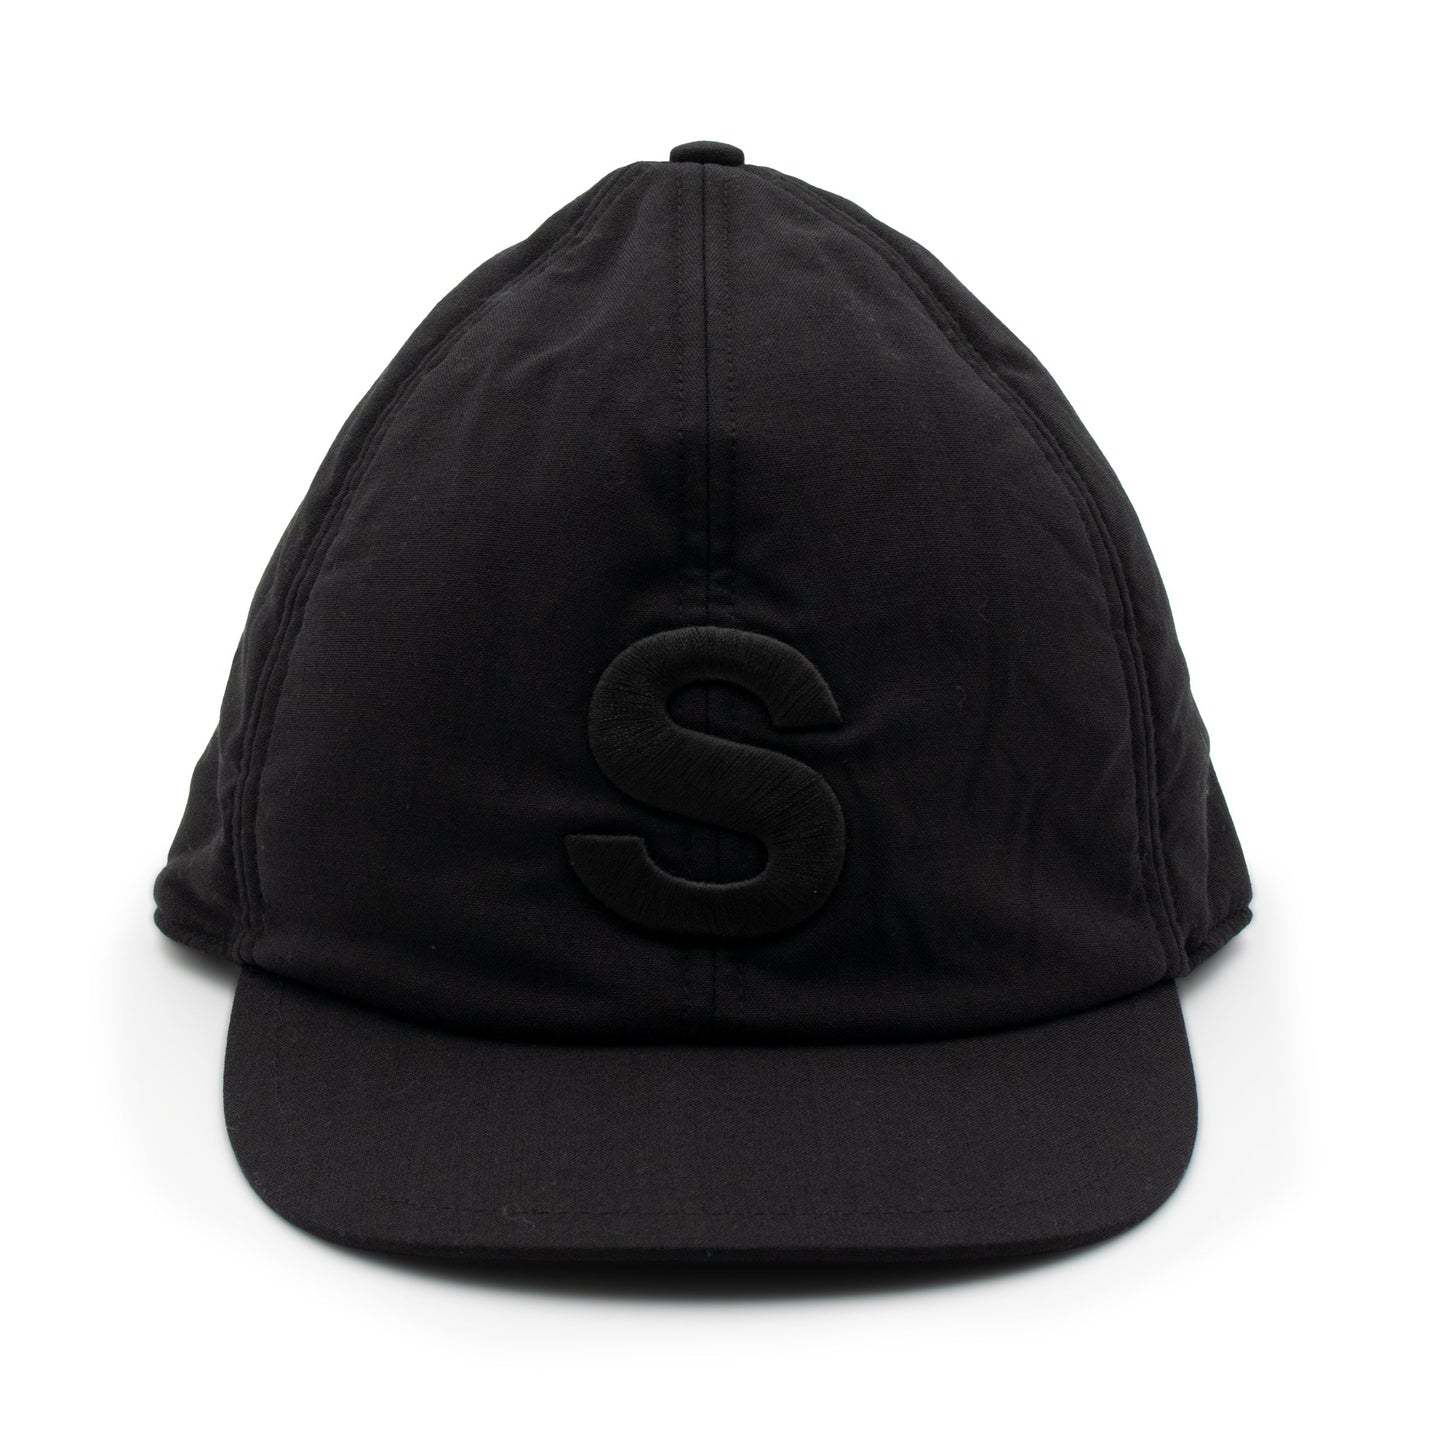 Suiting Mountain S Cap in Black